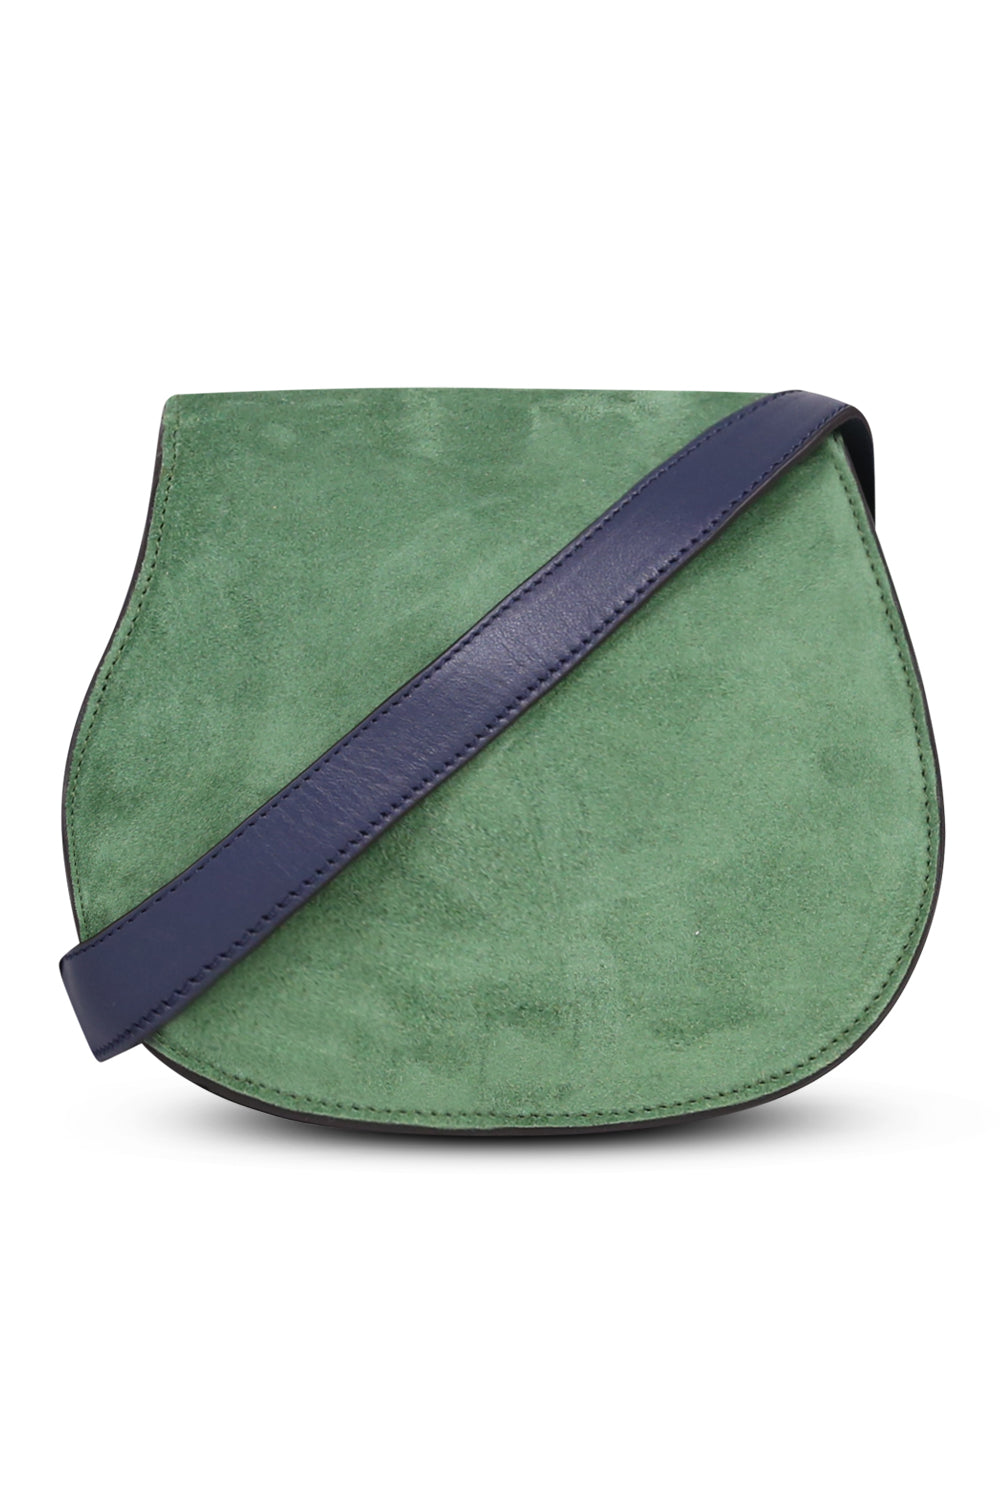 CHLOE BAGS GREEN MARCIE SMALL BAG | BRIGHT GREEN SUEDE